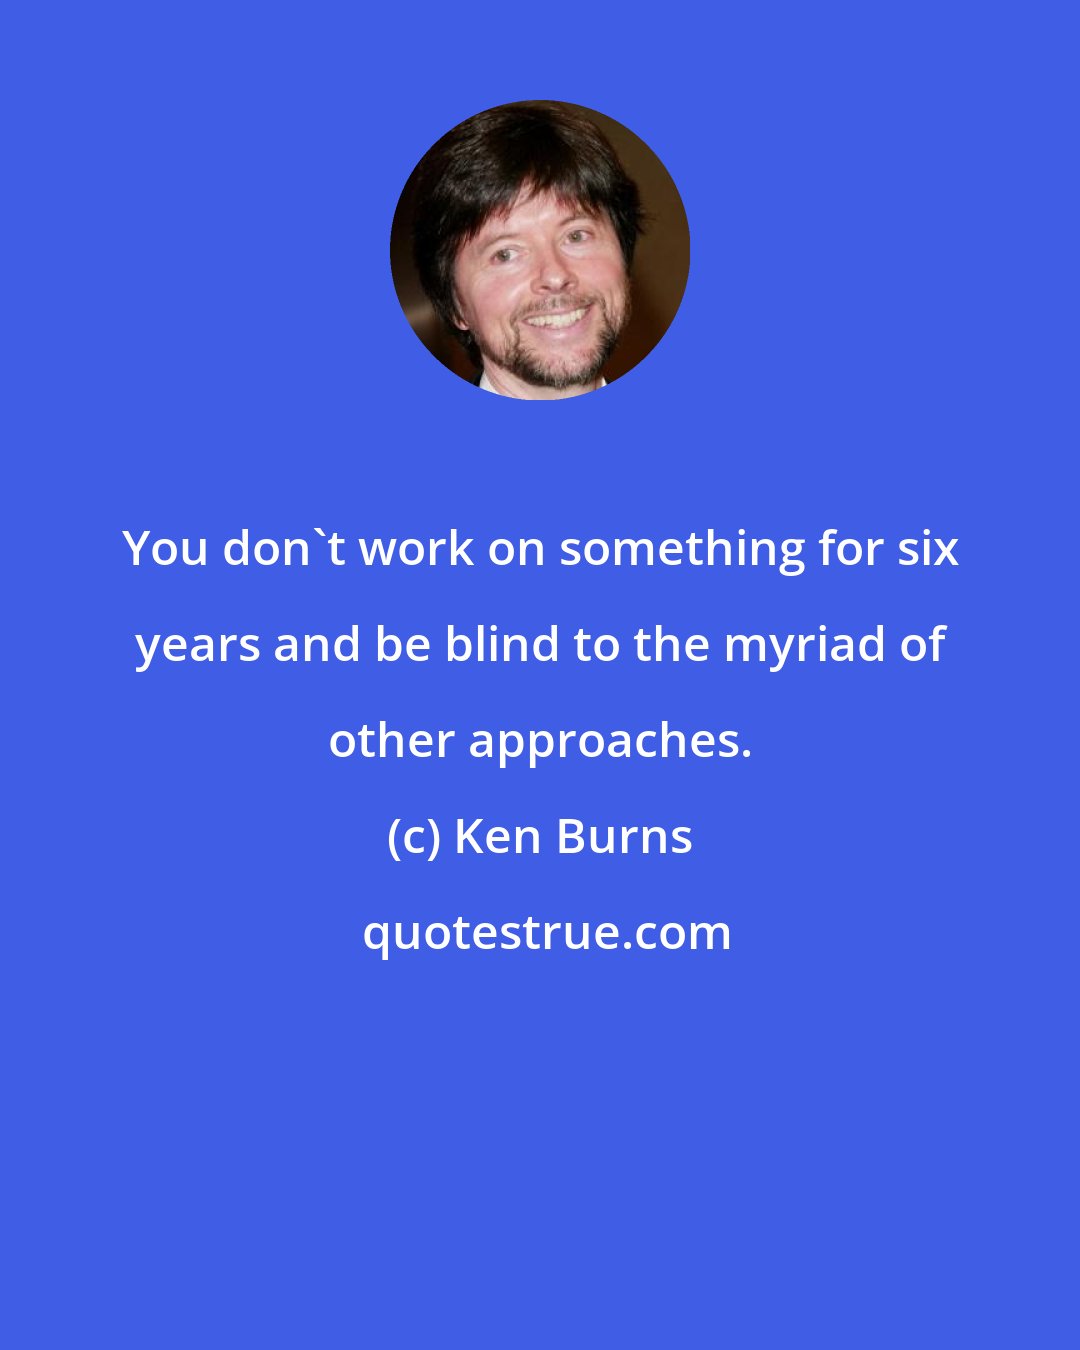 Ken Burns: You don't work on something for six years and be blind to the myriad of other approaches.